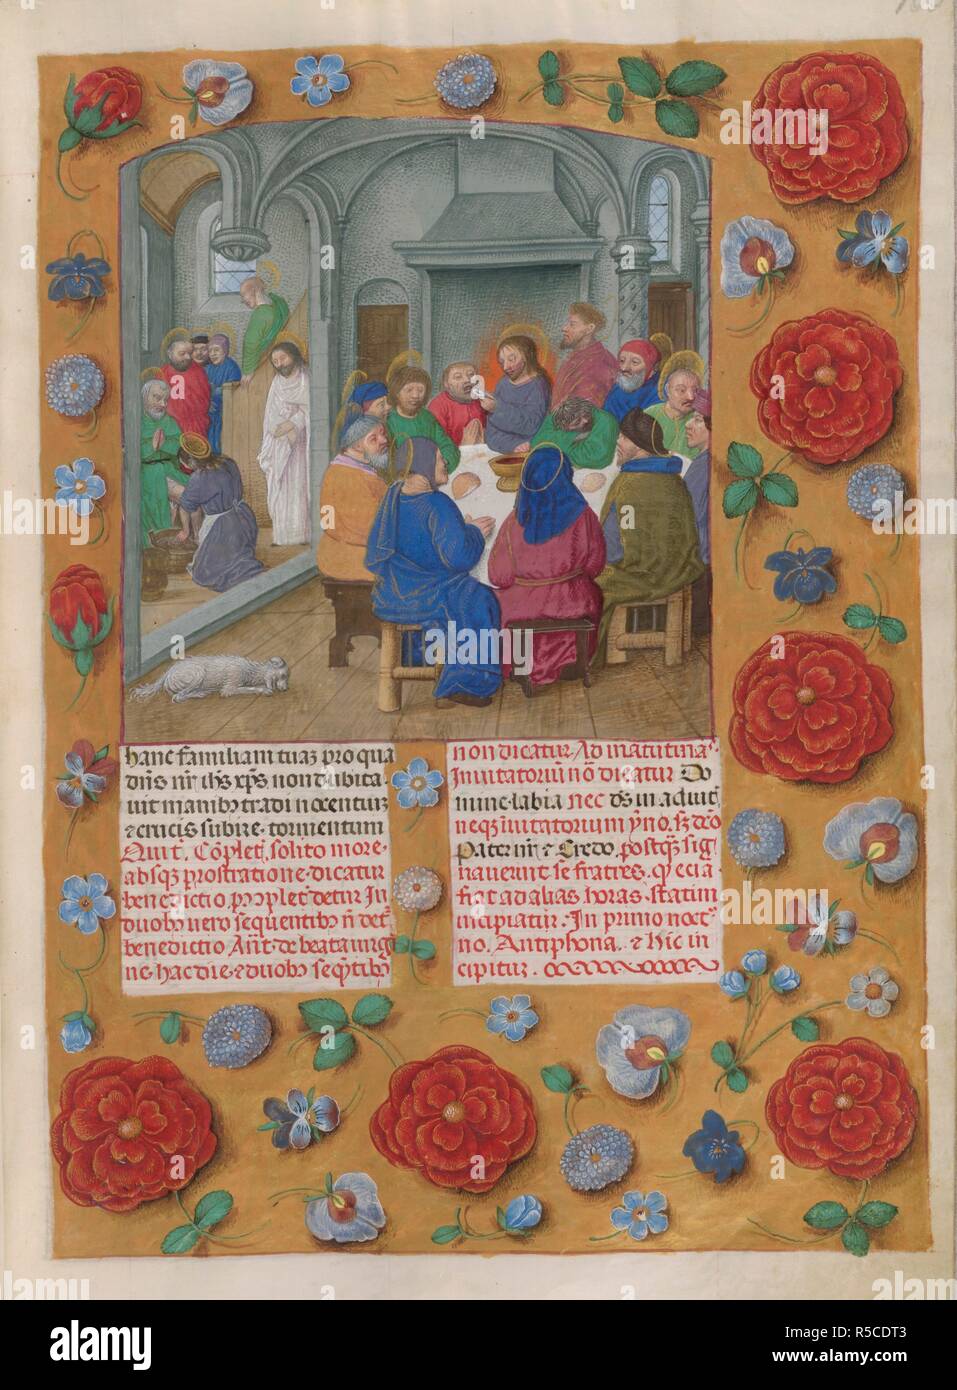 Temporale (1st portion: from First Sunday of Advent to Holy Saturday). The Last Supper (Maundy Thursday, Matins). Border with floral decoration. Two columns of text. . Isabella Breviary. Breviary, Use of the Dominicans ('The Breviary of Queen Isabella of Castile'). c 1497. Source: Add. 18851 f.100. Language: Latin. Author: Master of the Dresden Prayer Book. Stock Photo